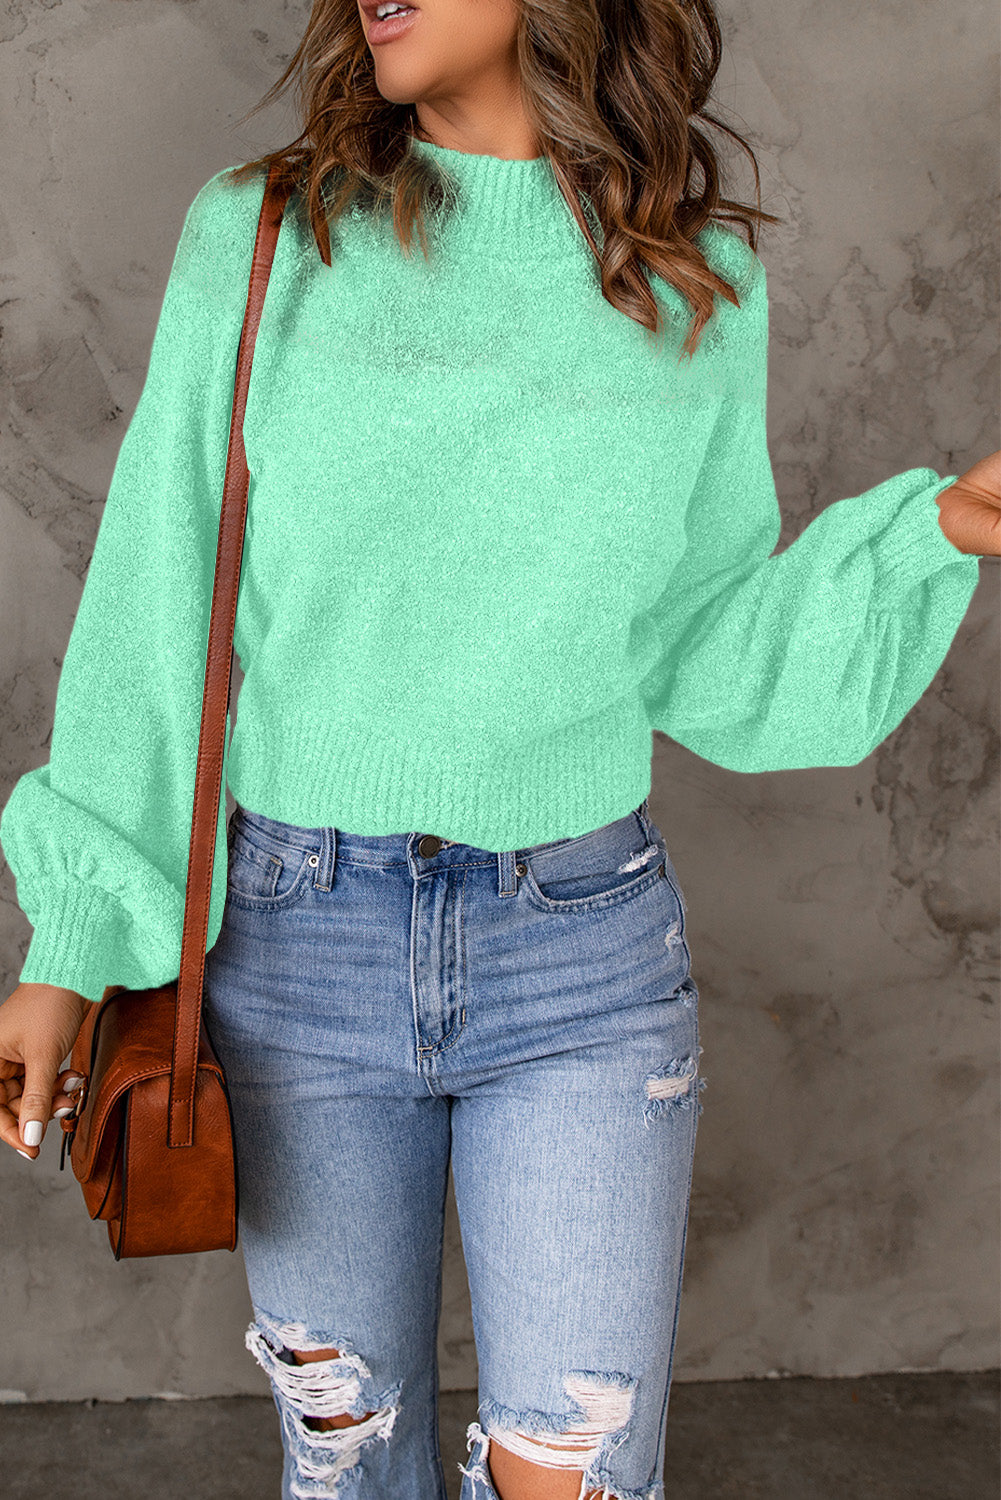 Solid Color Lantern Sleeve Knitted Sweater